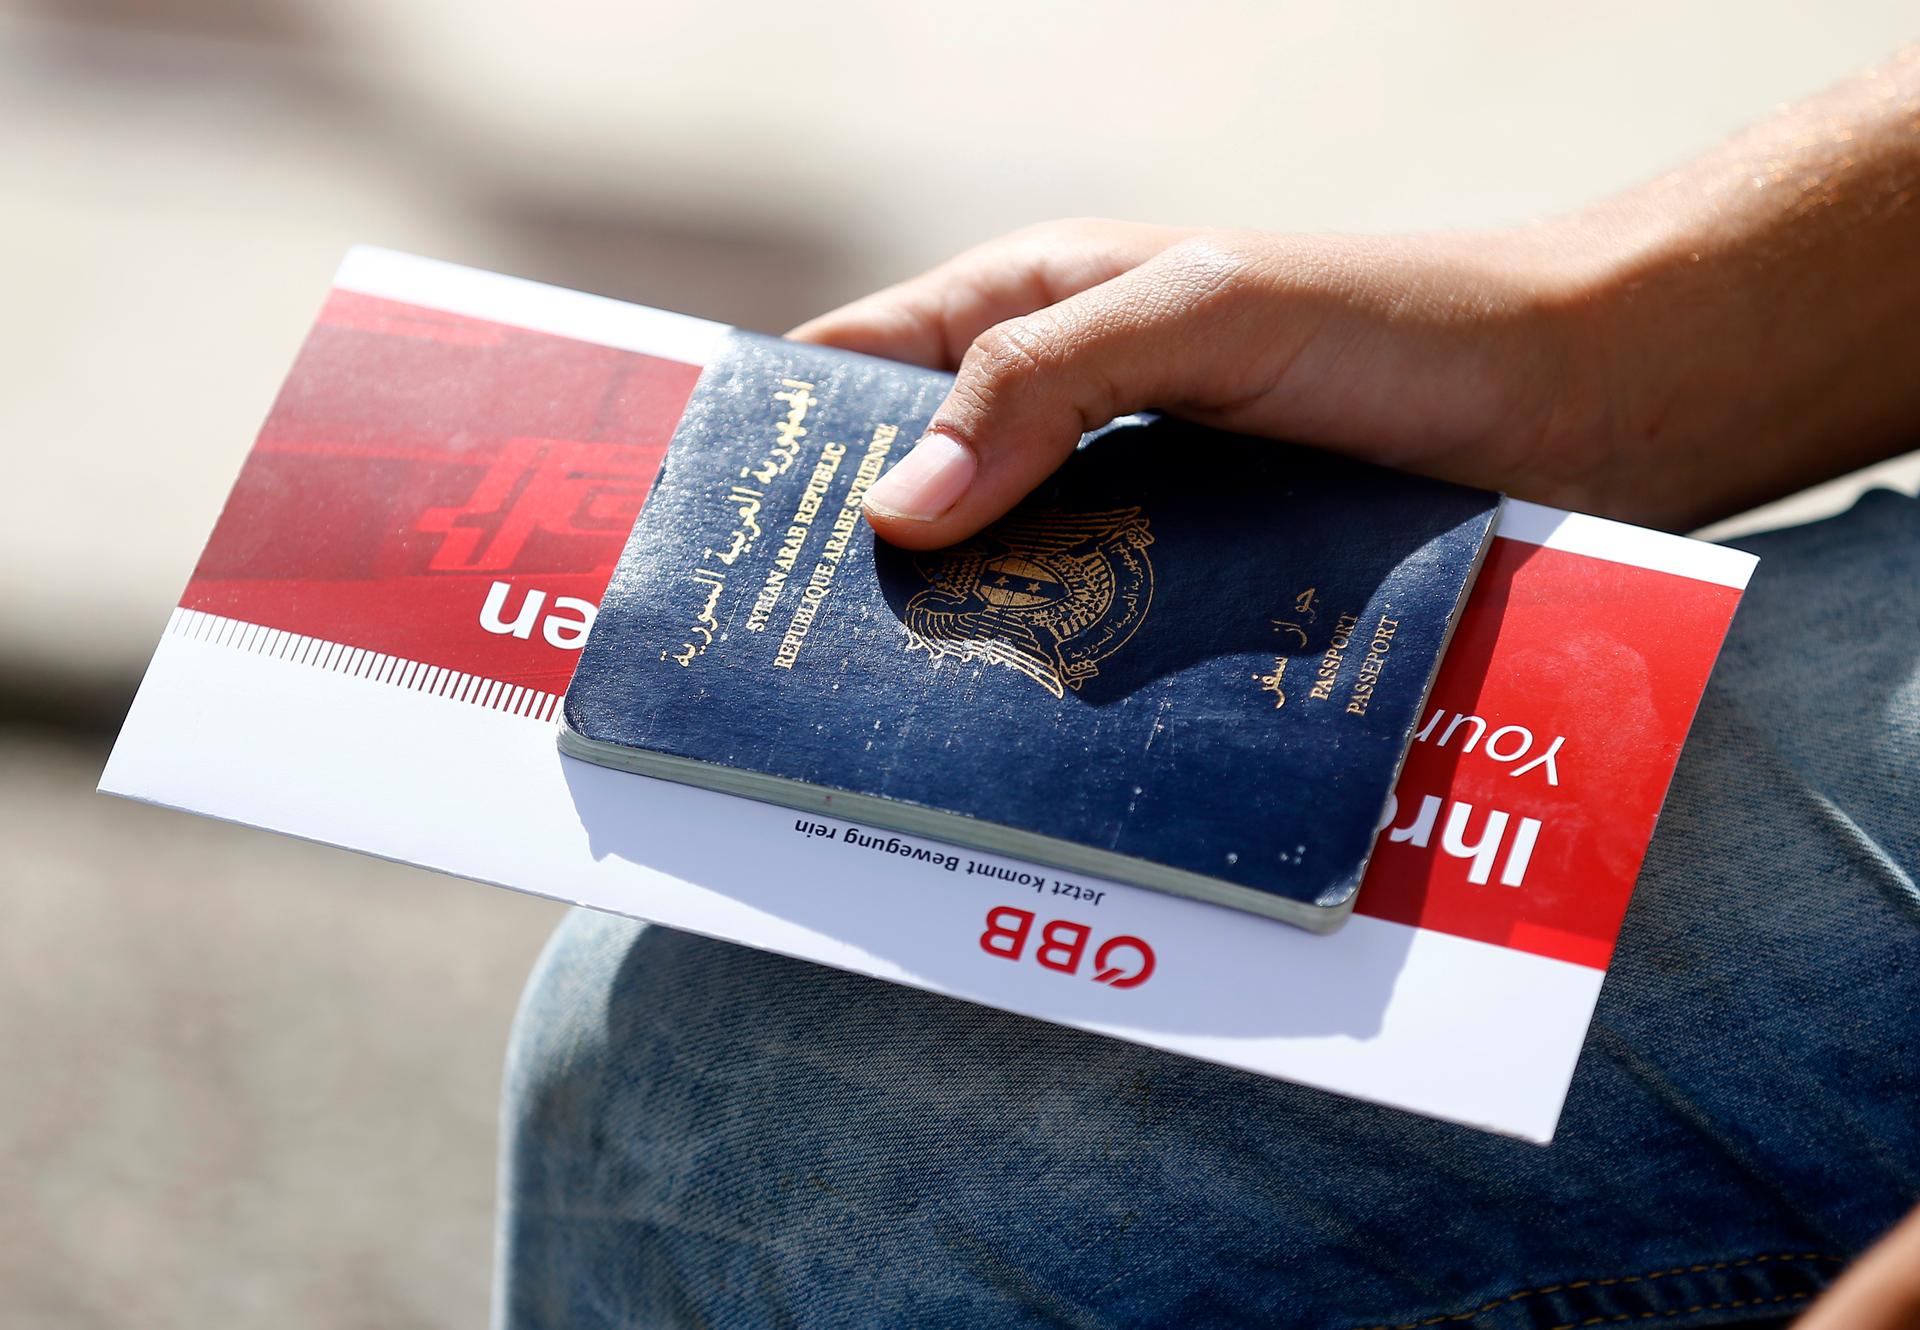 A migrant holds his passport and a train ticket in Freilassing, Germany September 15, 2015.